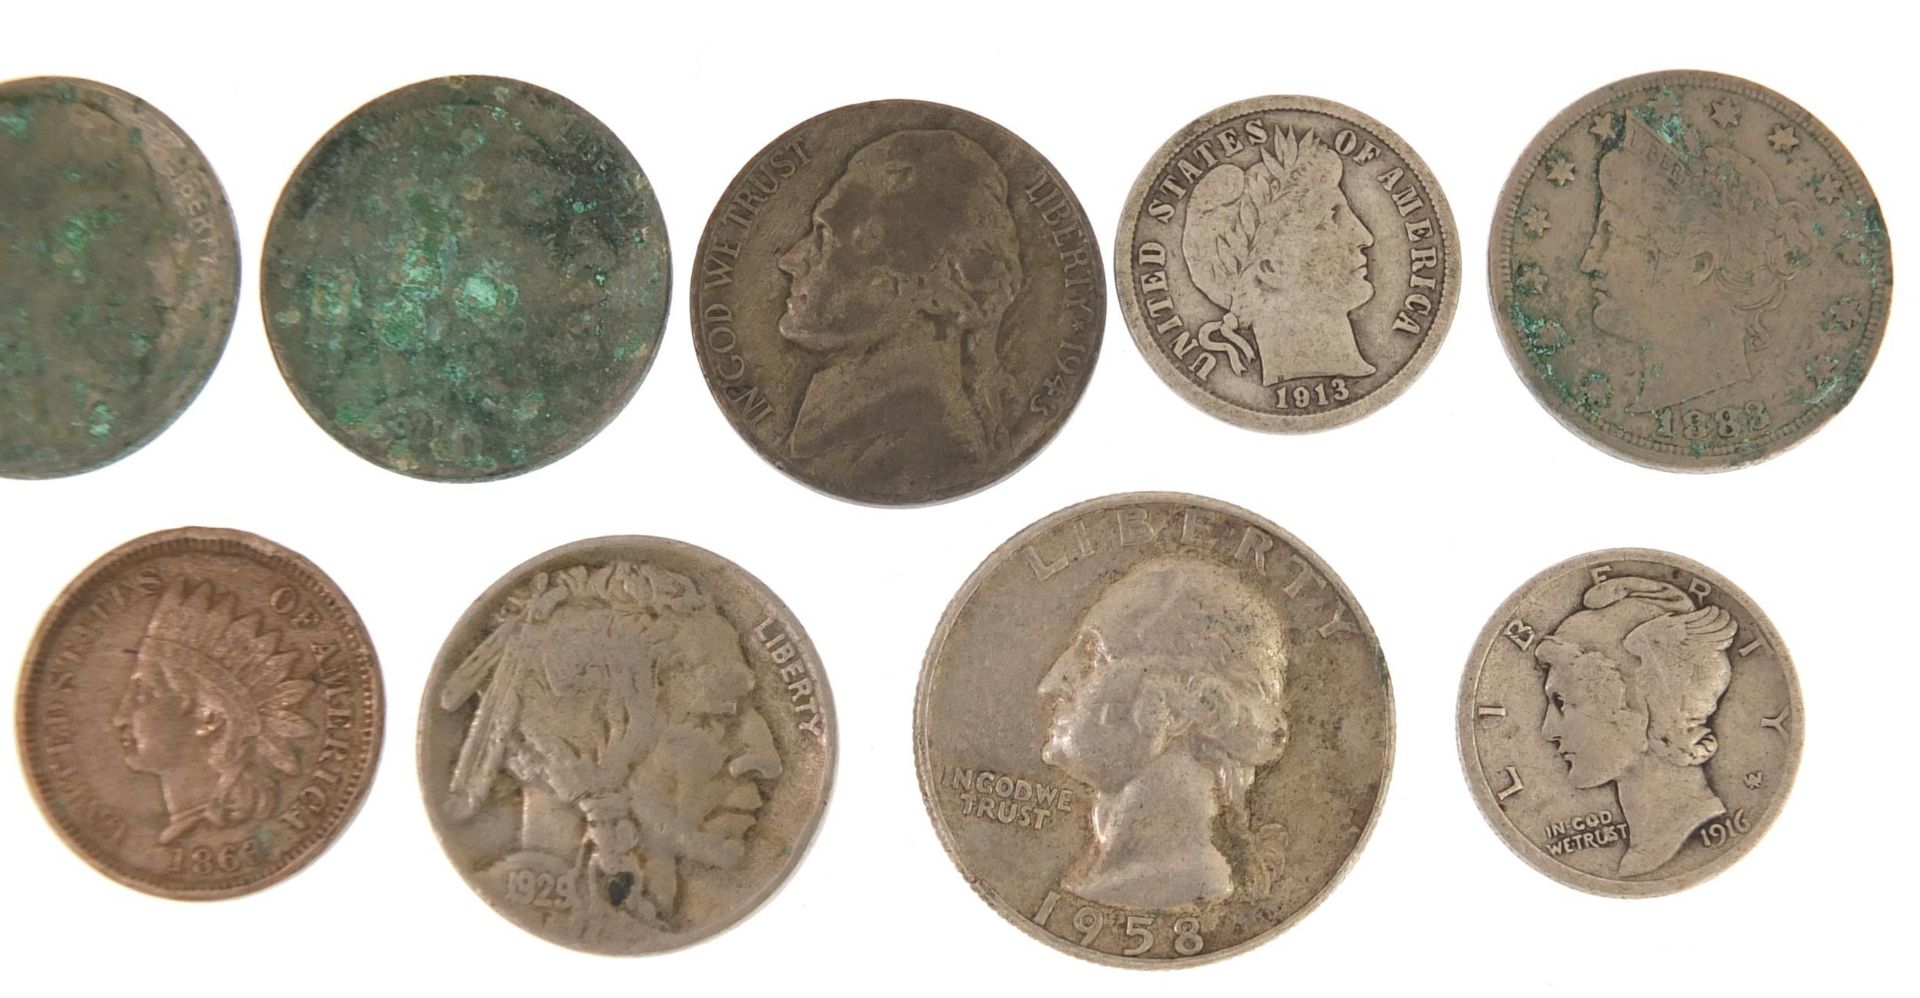 19th century and later American coinage including 1848 one cent and 1863 one cent - Image 3 of 3